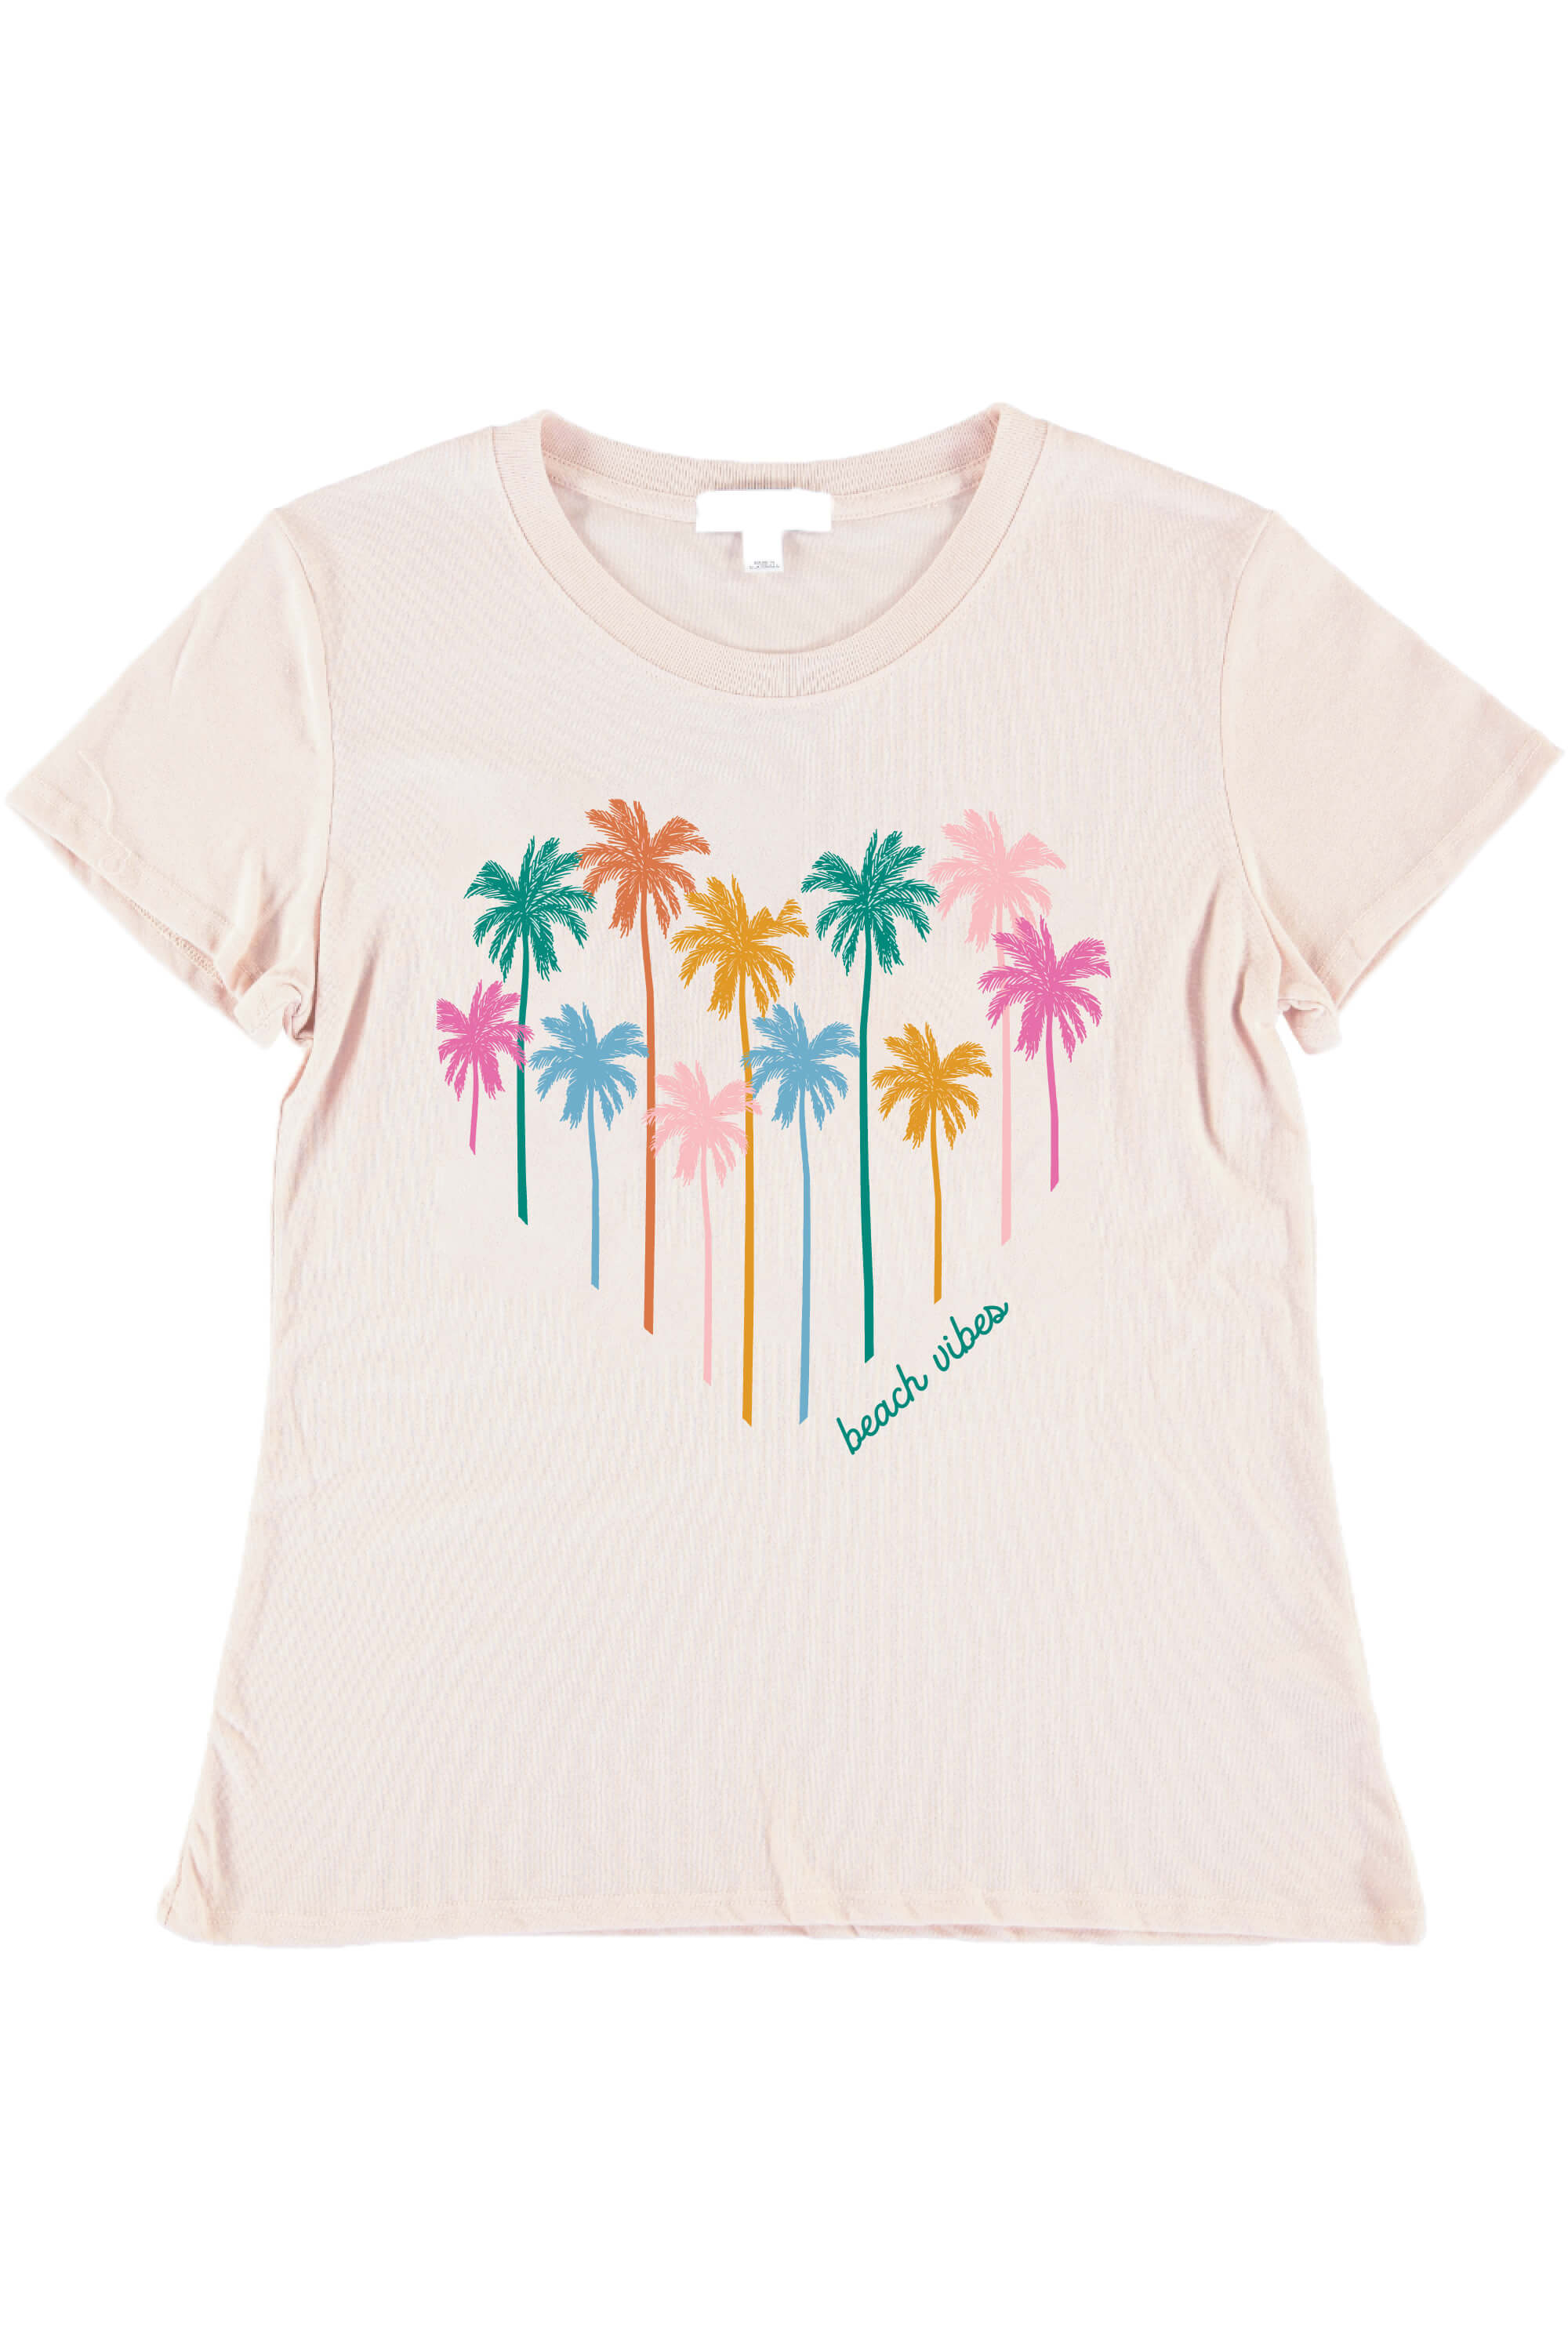 BEACH VIBES YOUTH SIZE LOOSE TEE